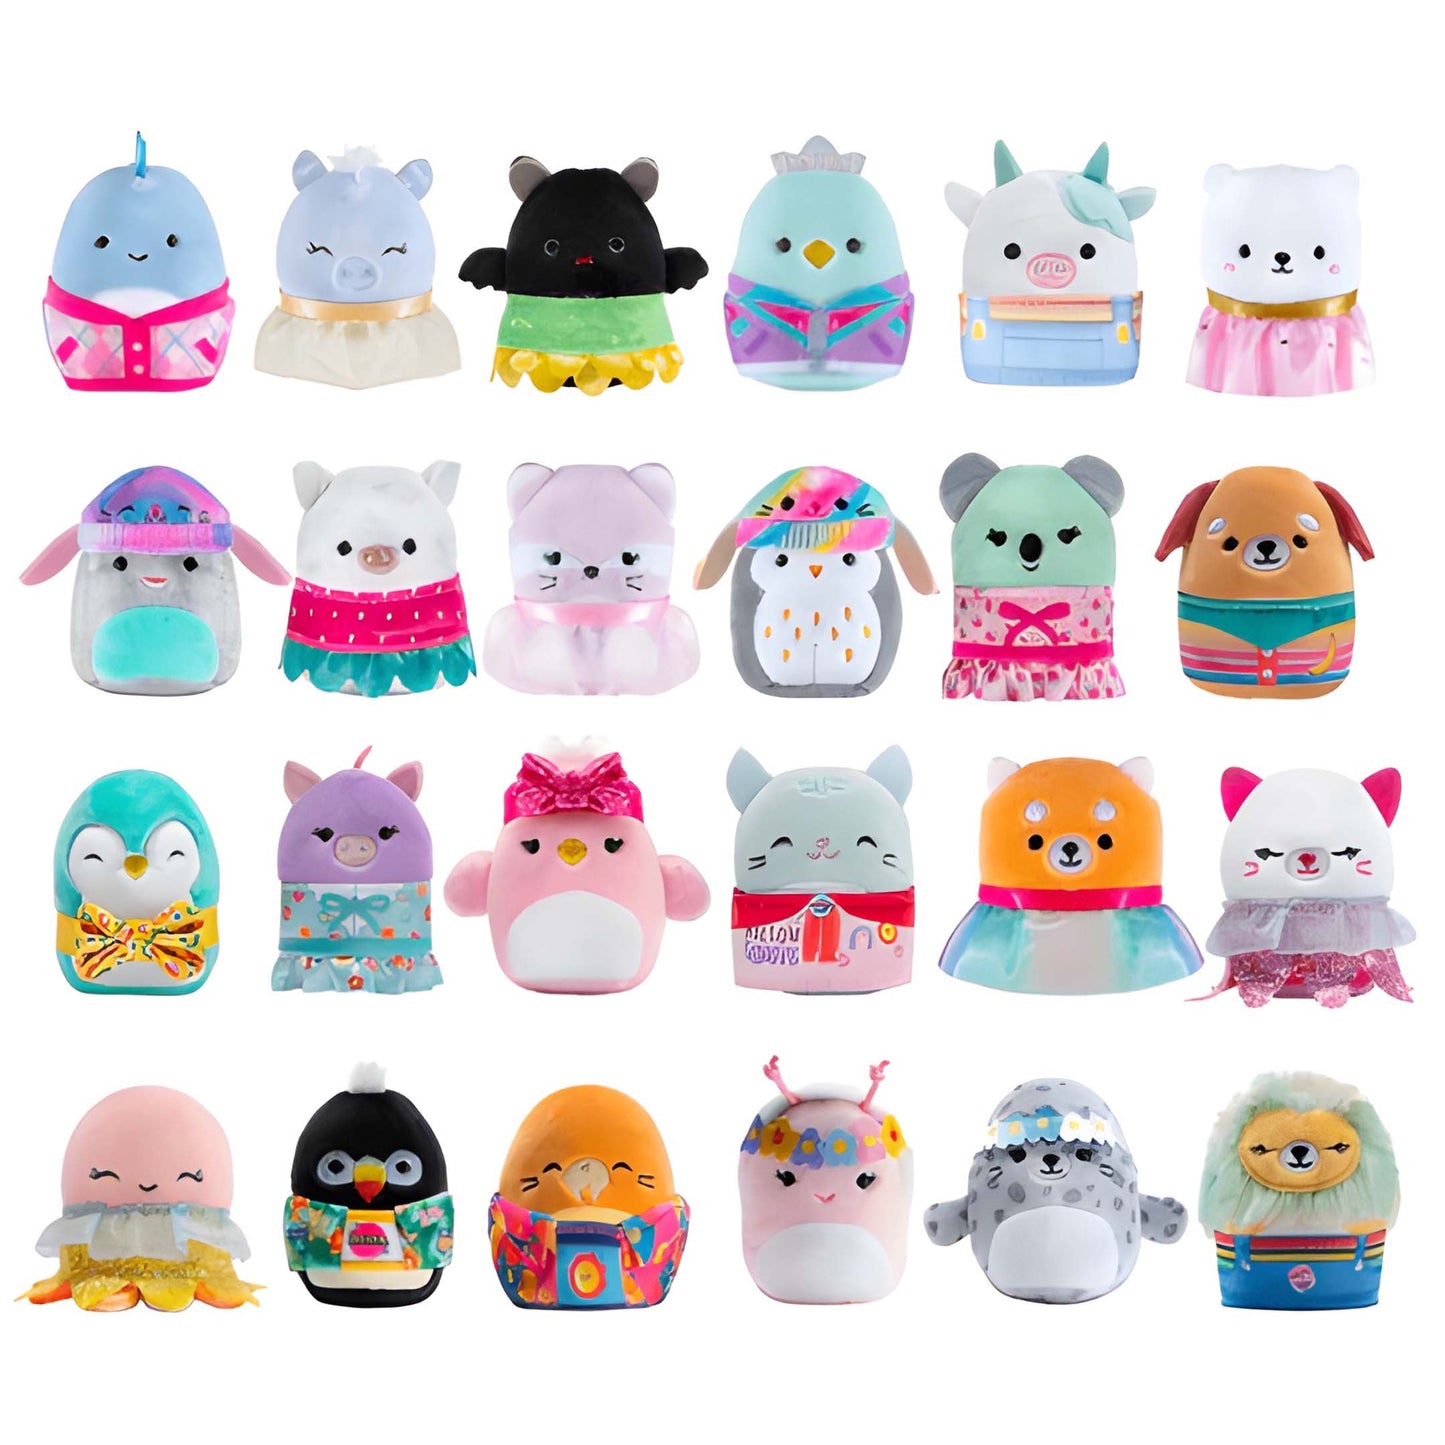 Squishmallows Squishville Series 4 - Choose Yours